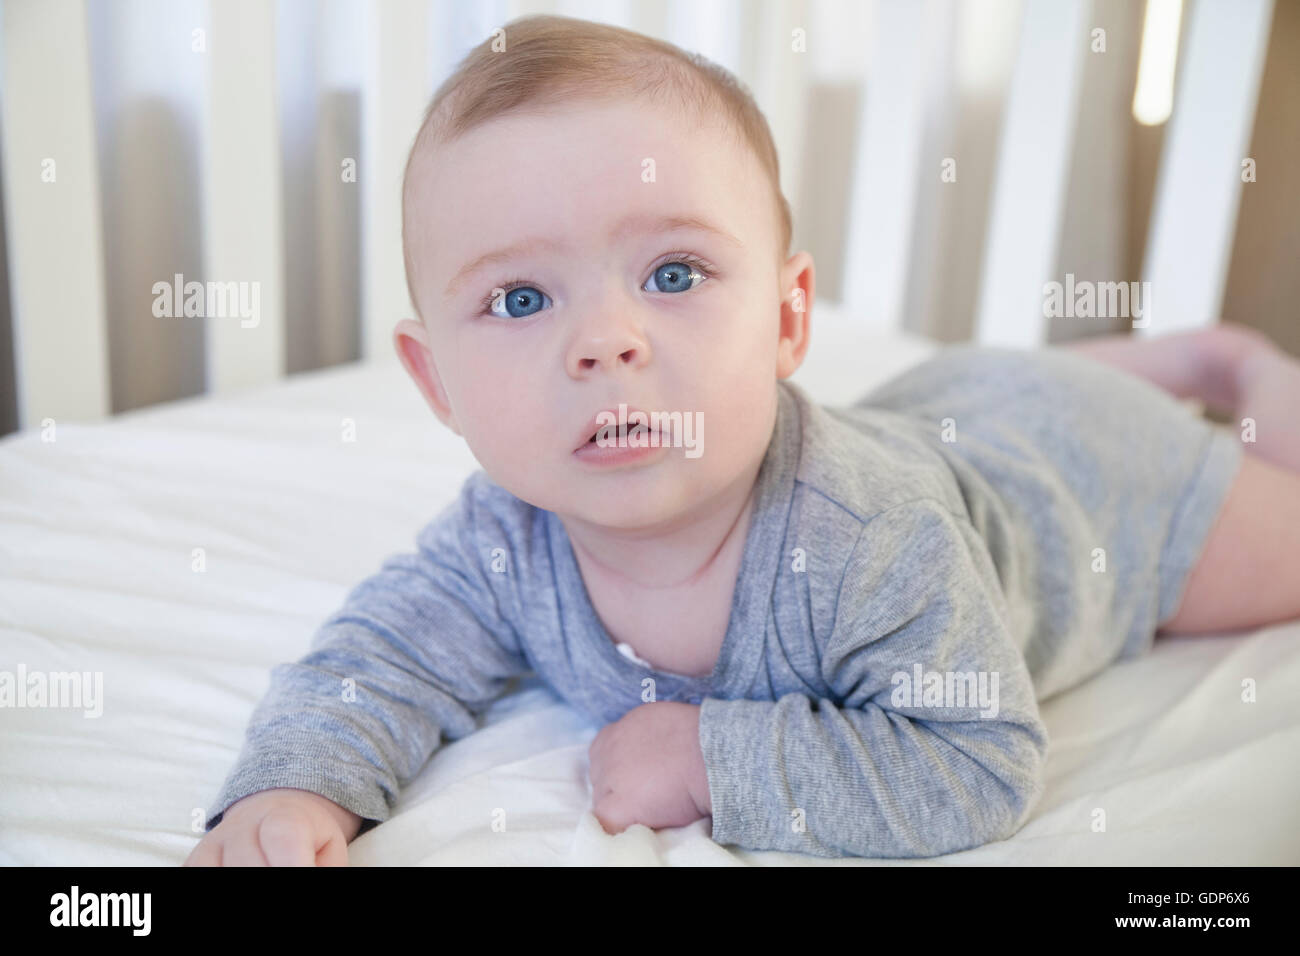 Baby boy waking up in his crib Stock Photo